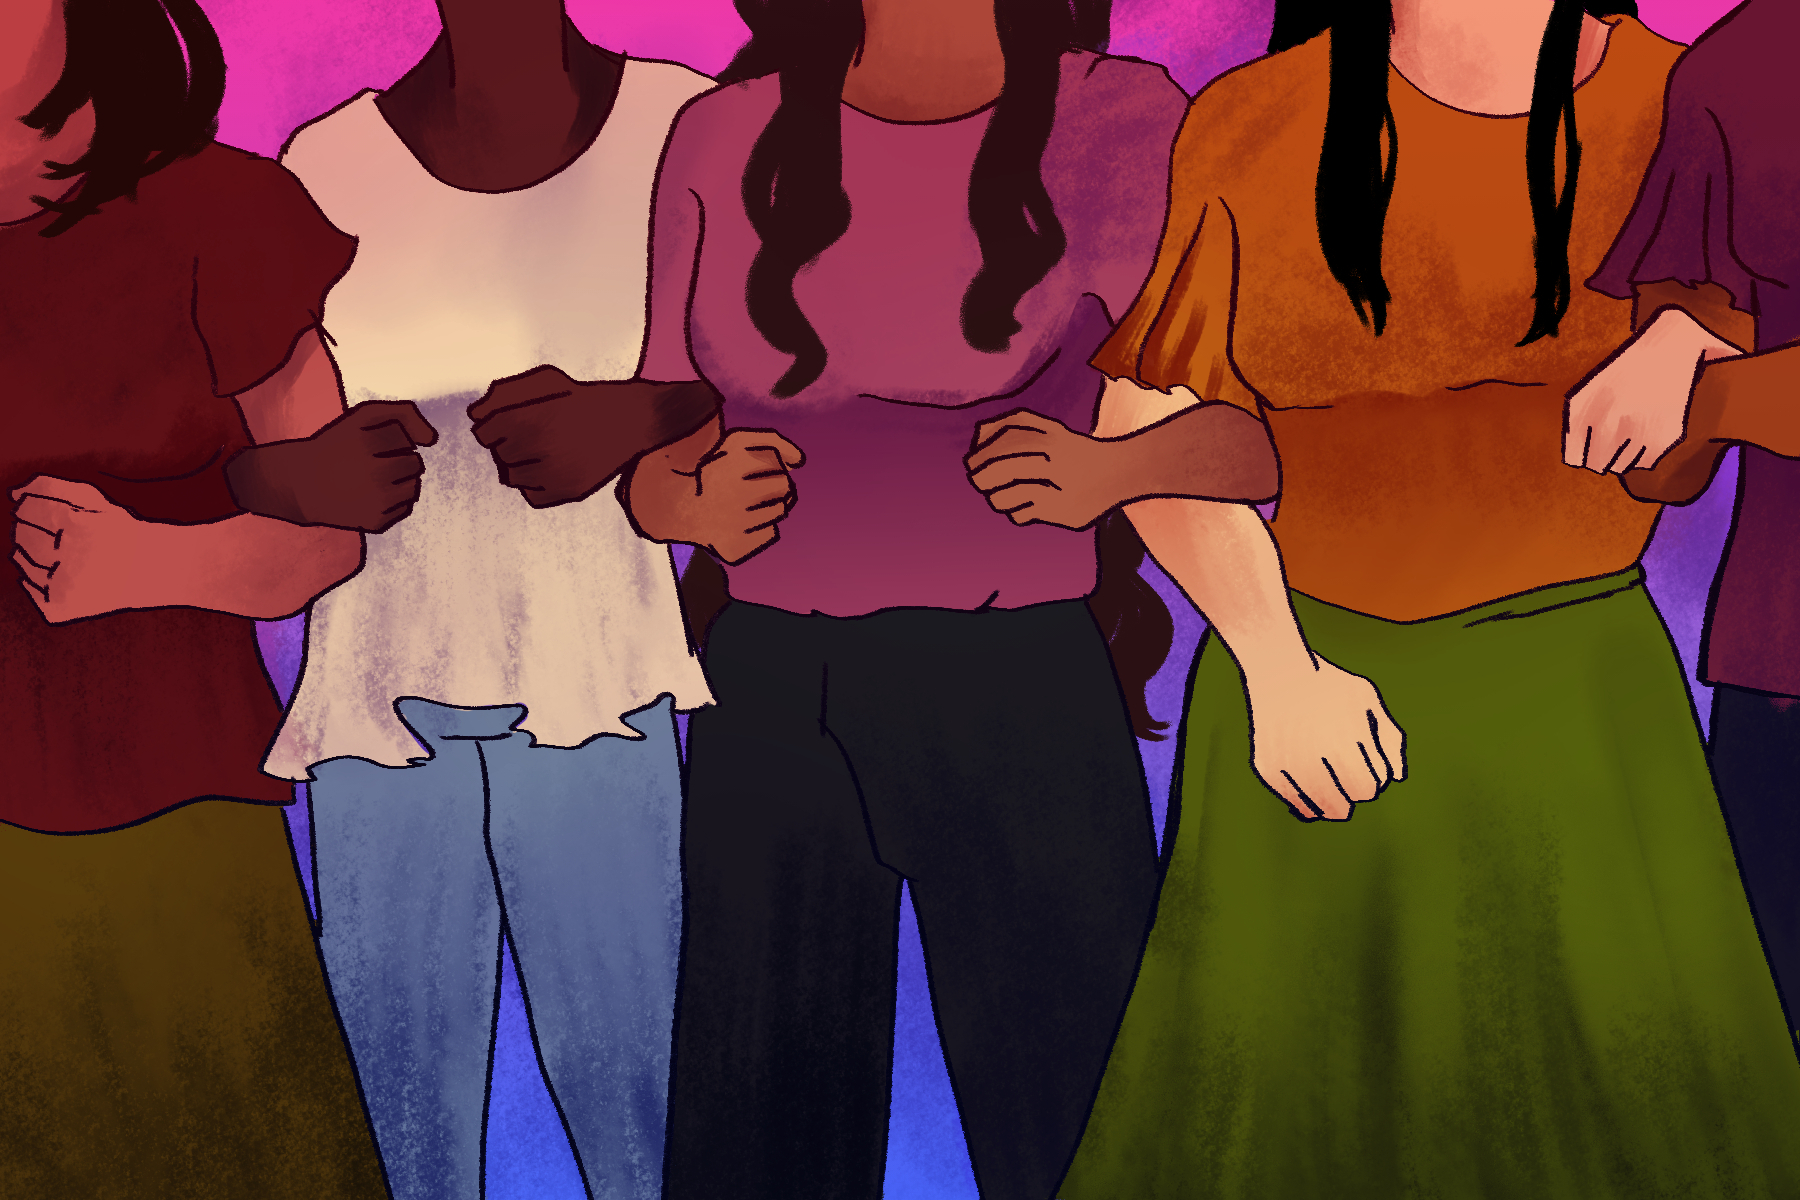 For an article about the book Hood Feminism, an illustration of women standing in solidarity . (Illustration by Lucas DeJesus, Montserrat College of Art)